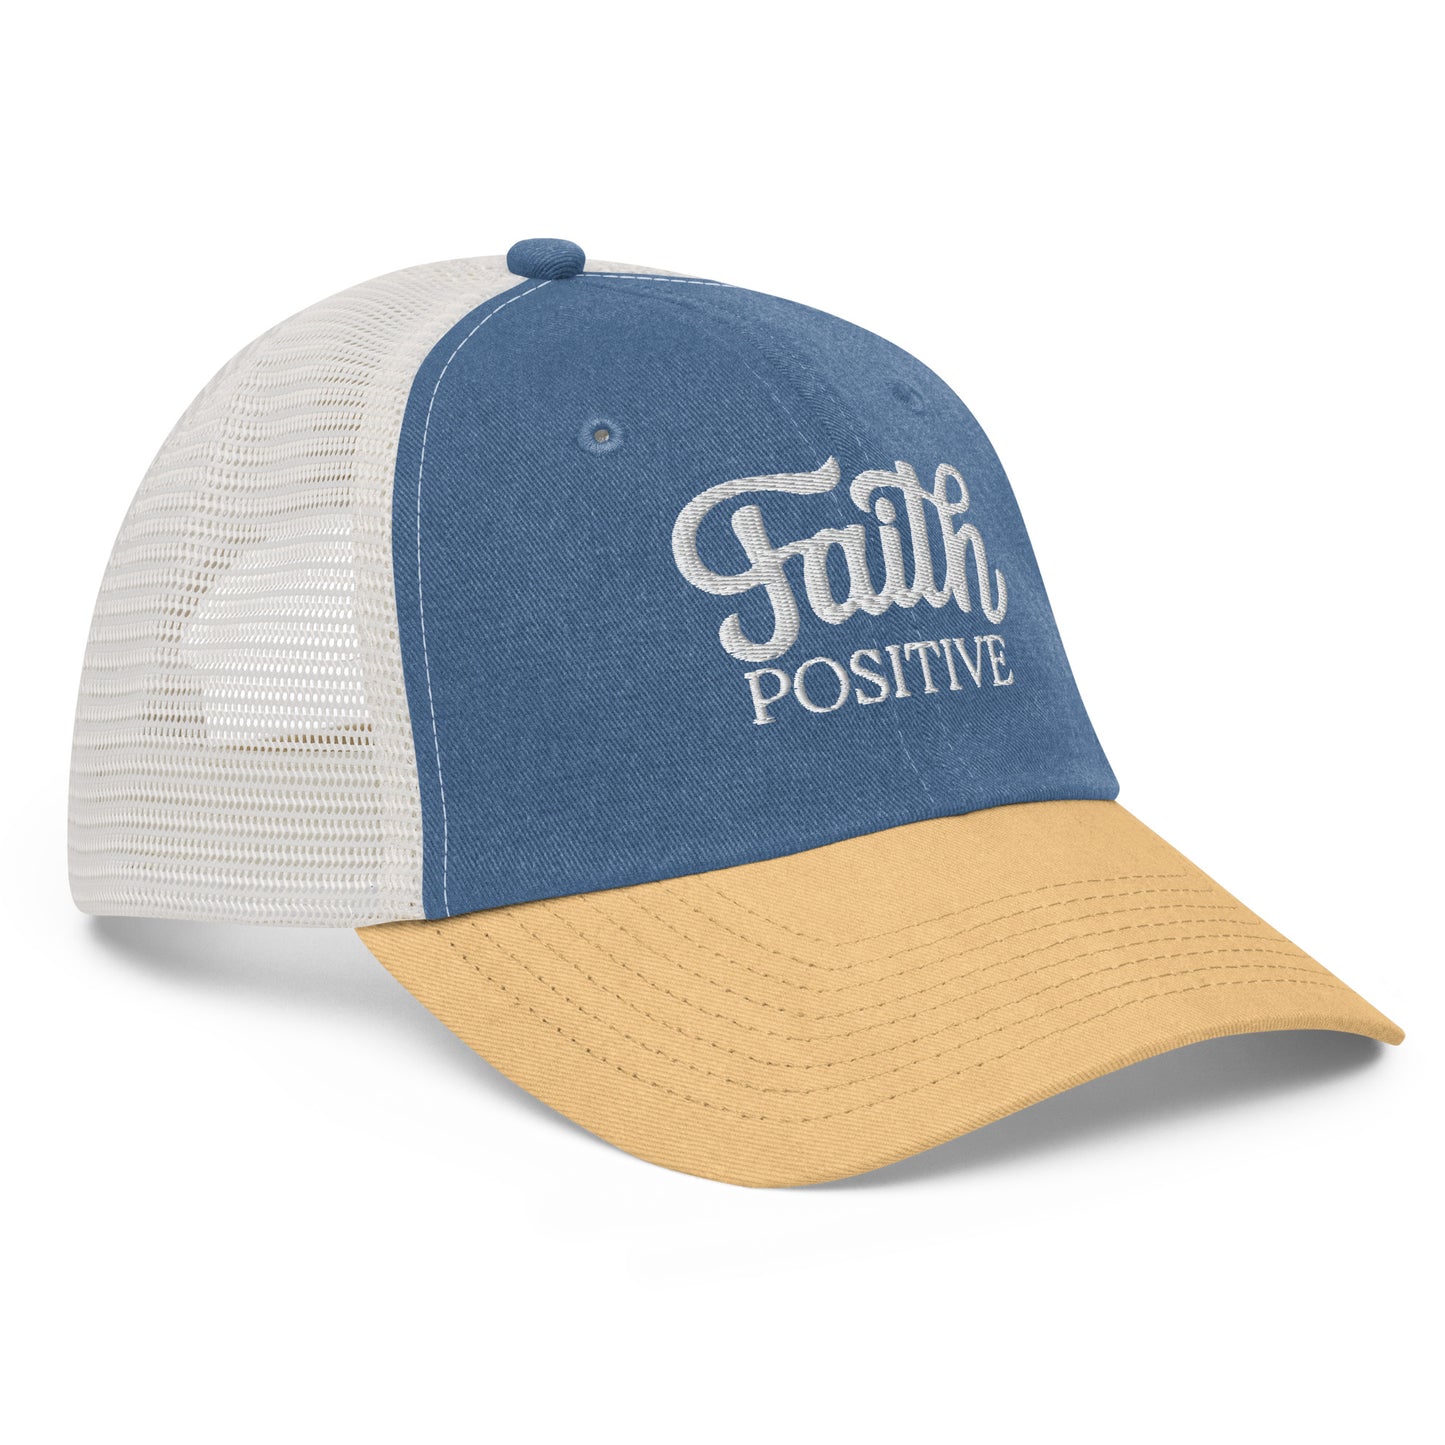 This is the Faith Positive low profile hat. The Faith Positive logo is embroidered on the front with white thread. This hat is pigment dyed, it has a mesh back, blue front and yellow bill. This is the side view of the product.